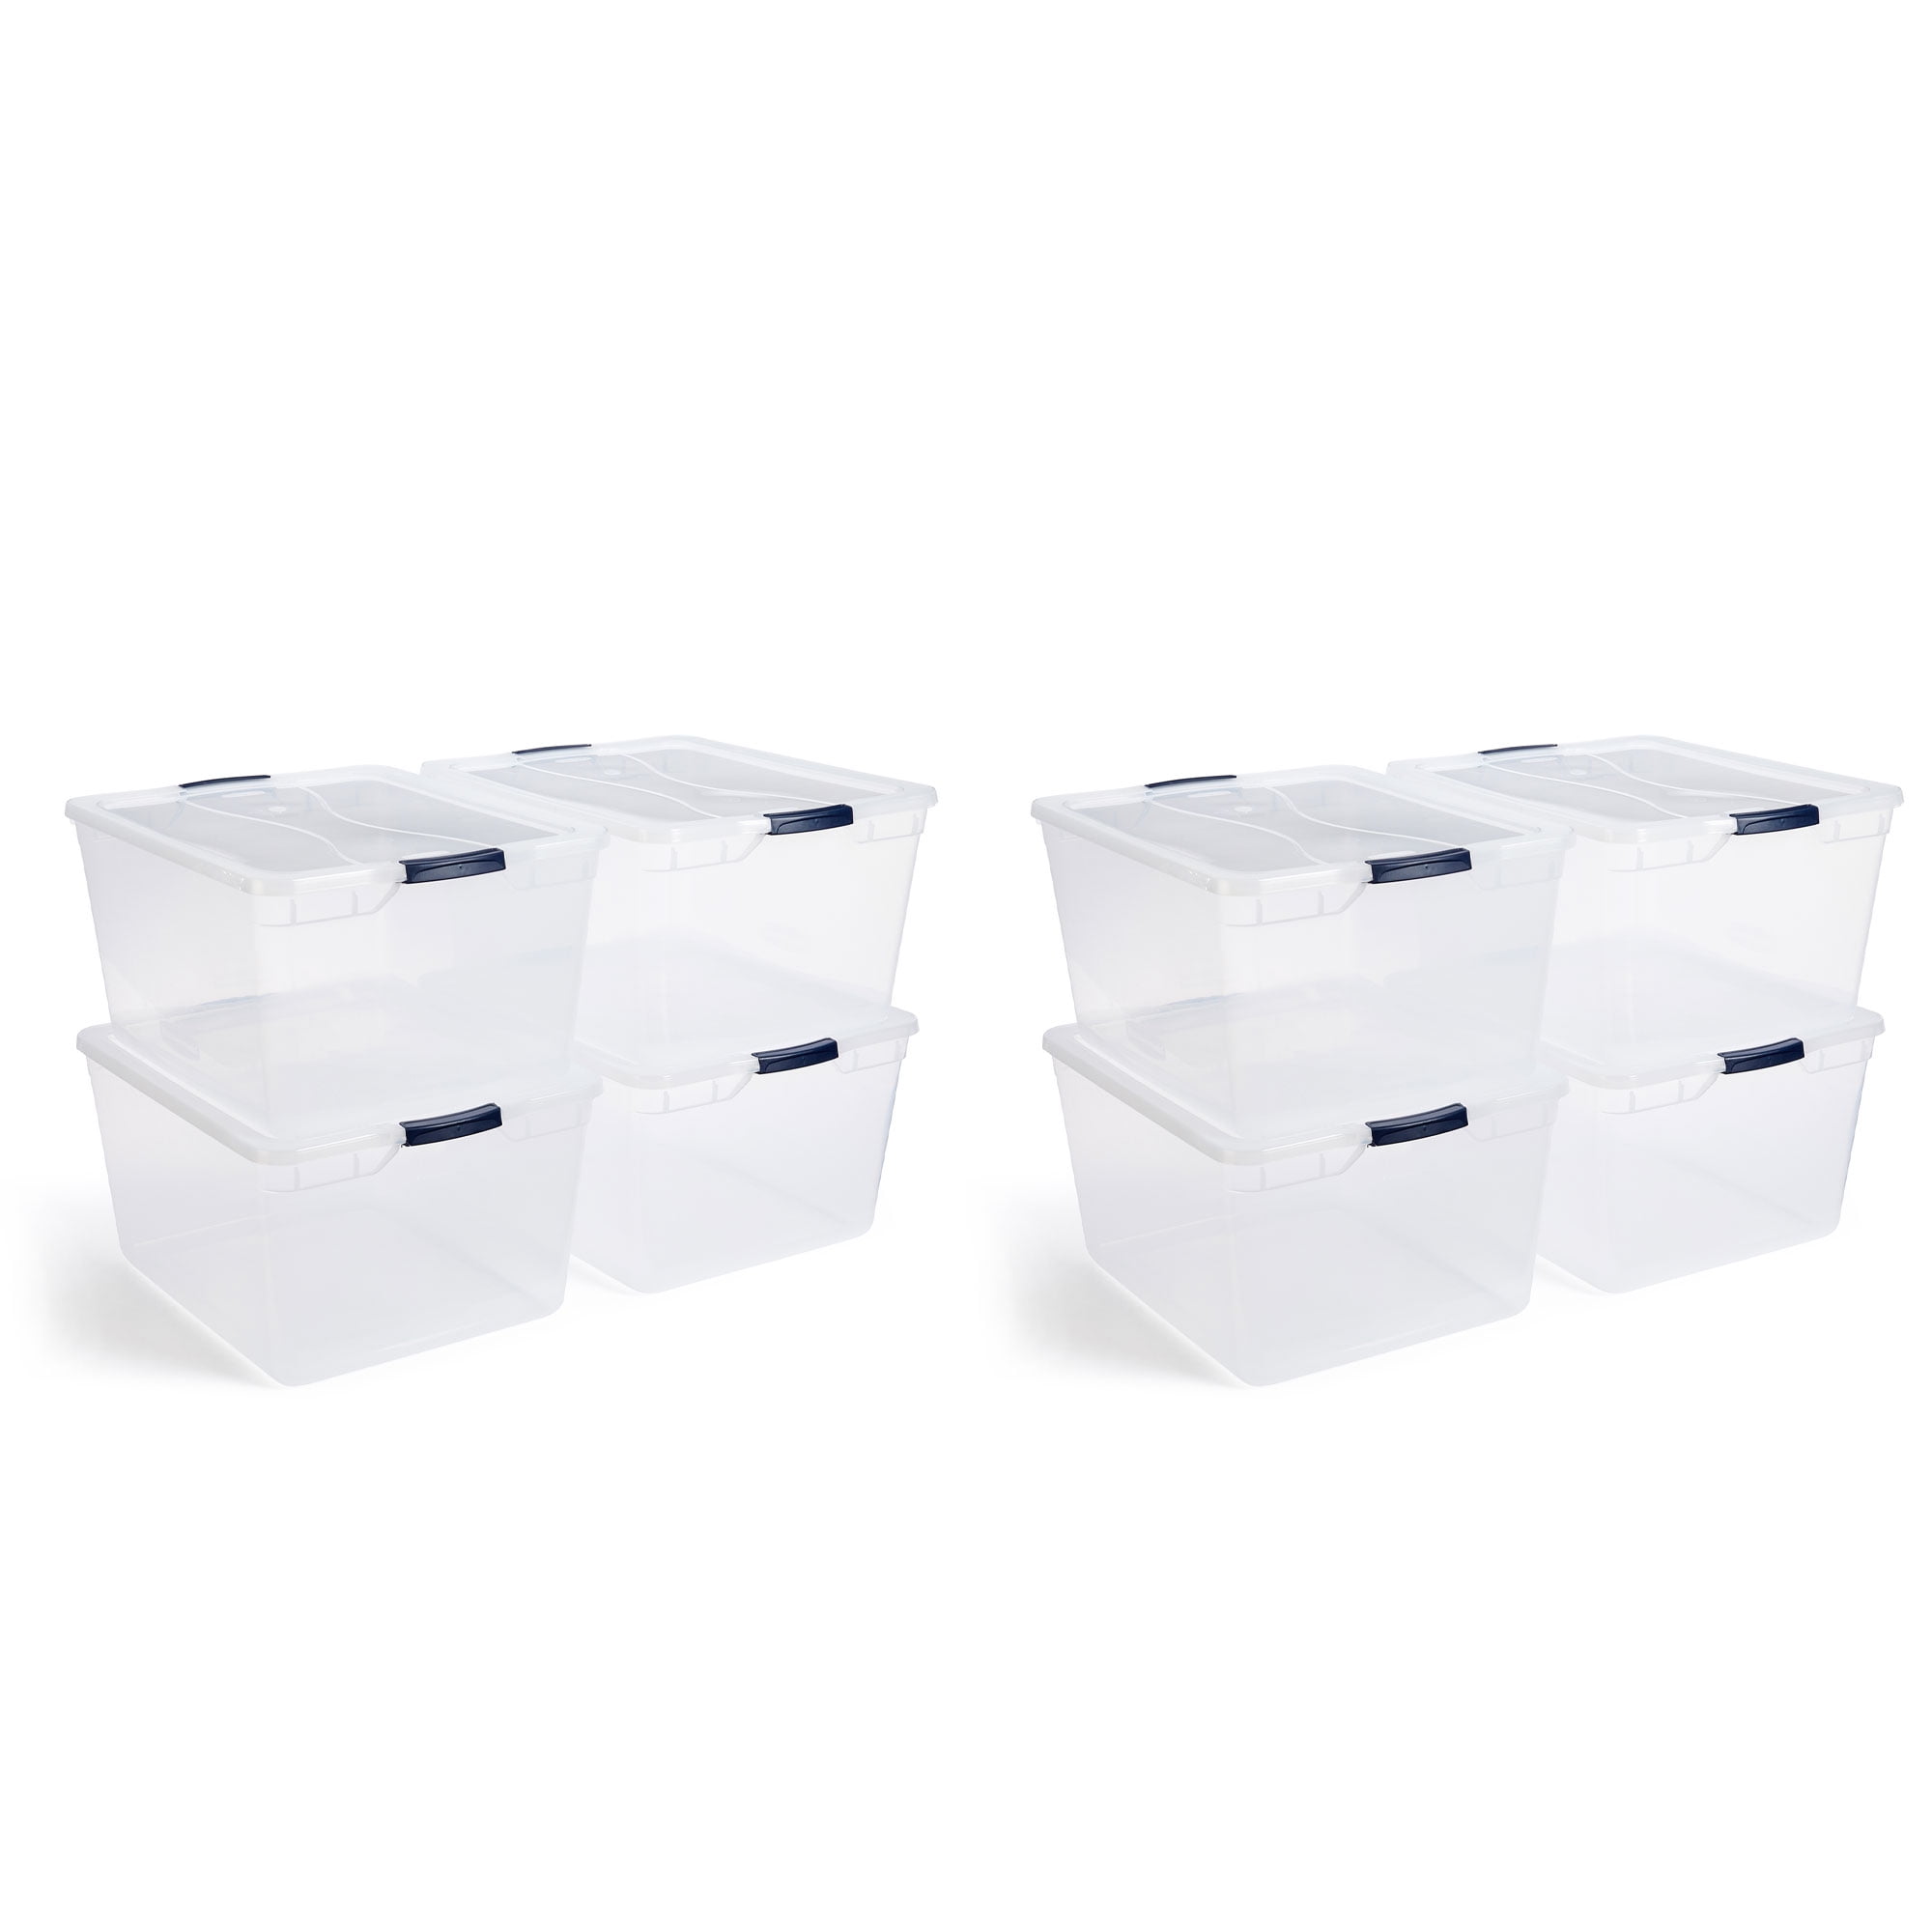 Rubbermaid® Clever Store Snap-Lid Container – ABCO